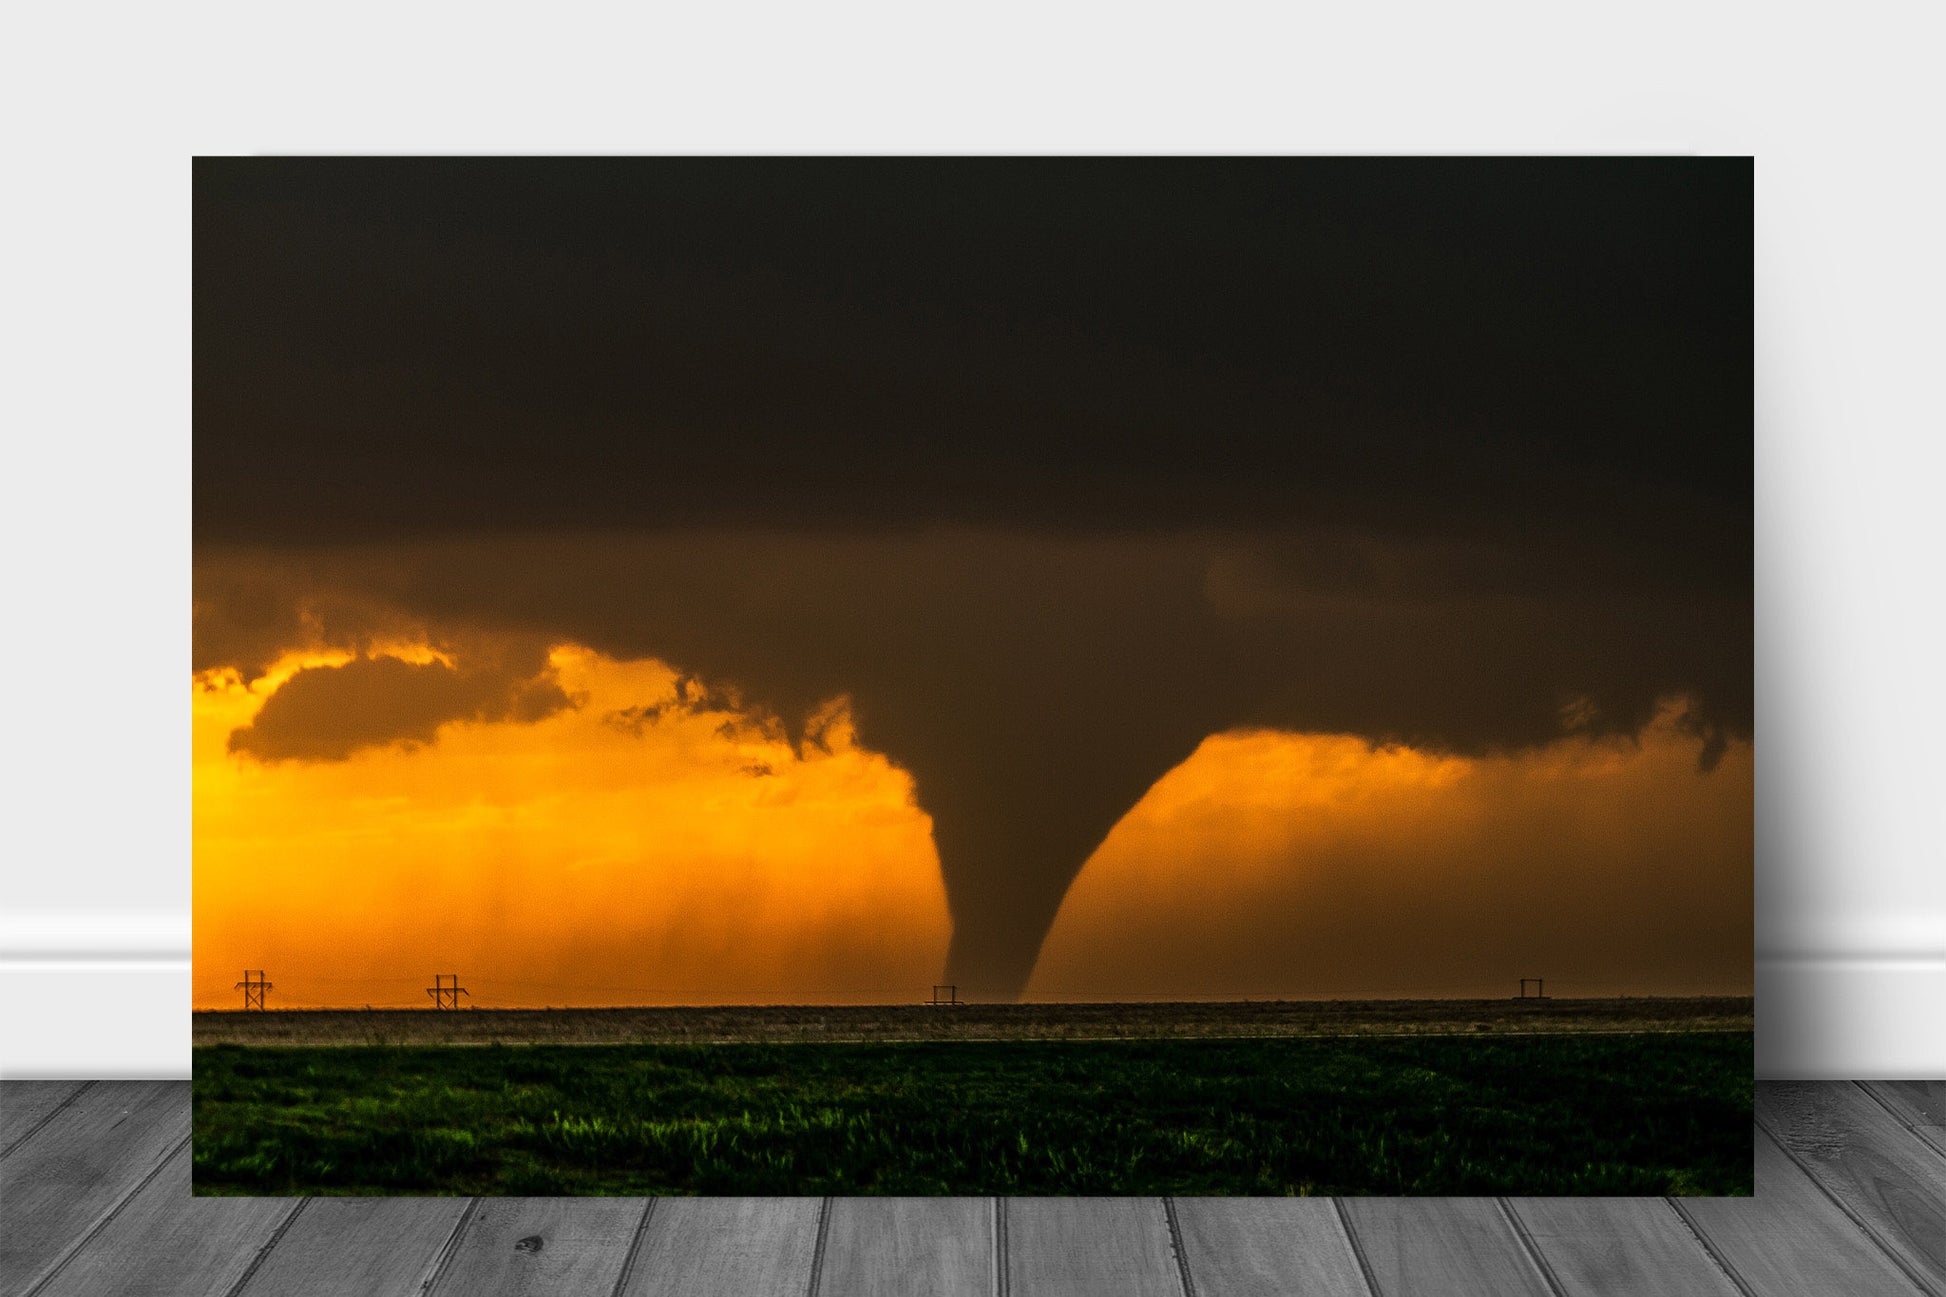 Storm metal print of a large tornado appearing as a silhouette against the evening sky in Kansas by Sean Ramsey of Southern Plains Photography.